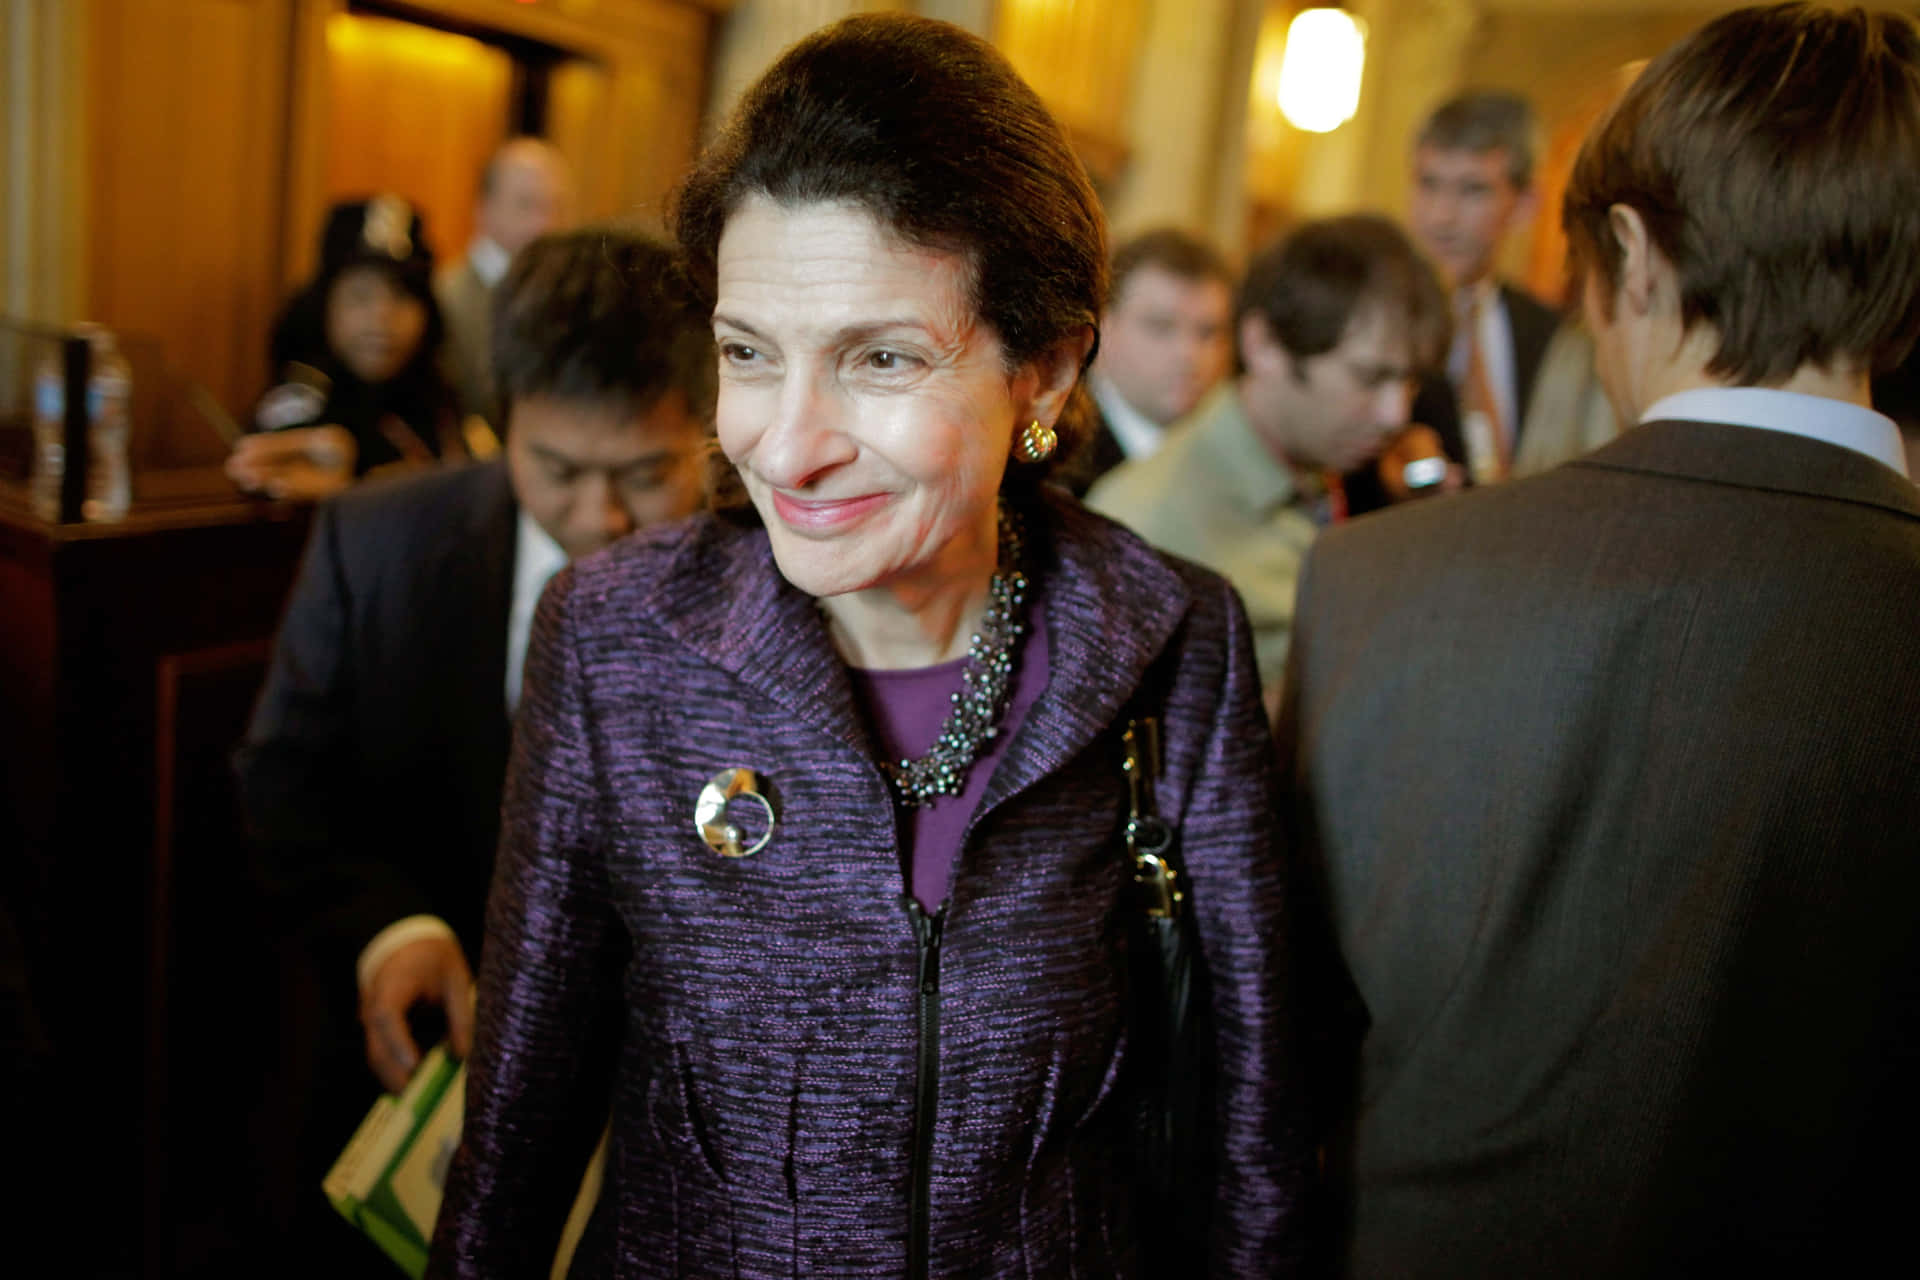 Olympia Snowe Interacting With Guests Wallpaper